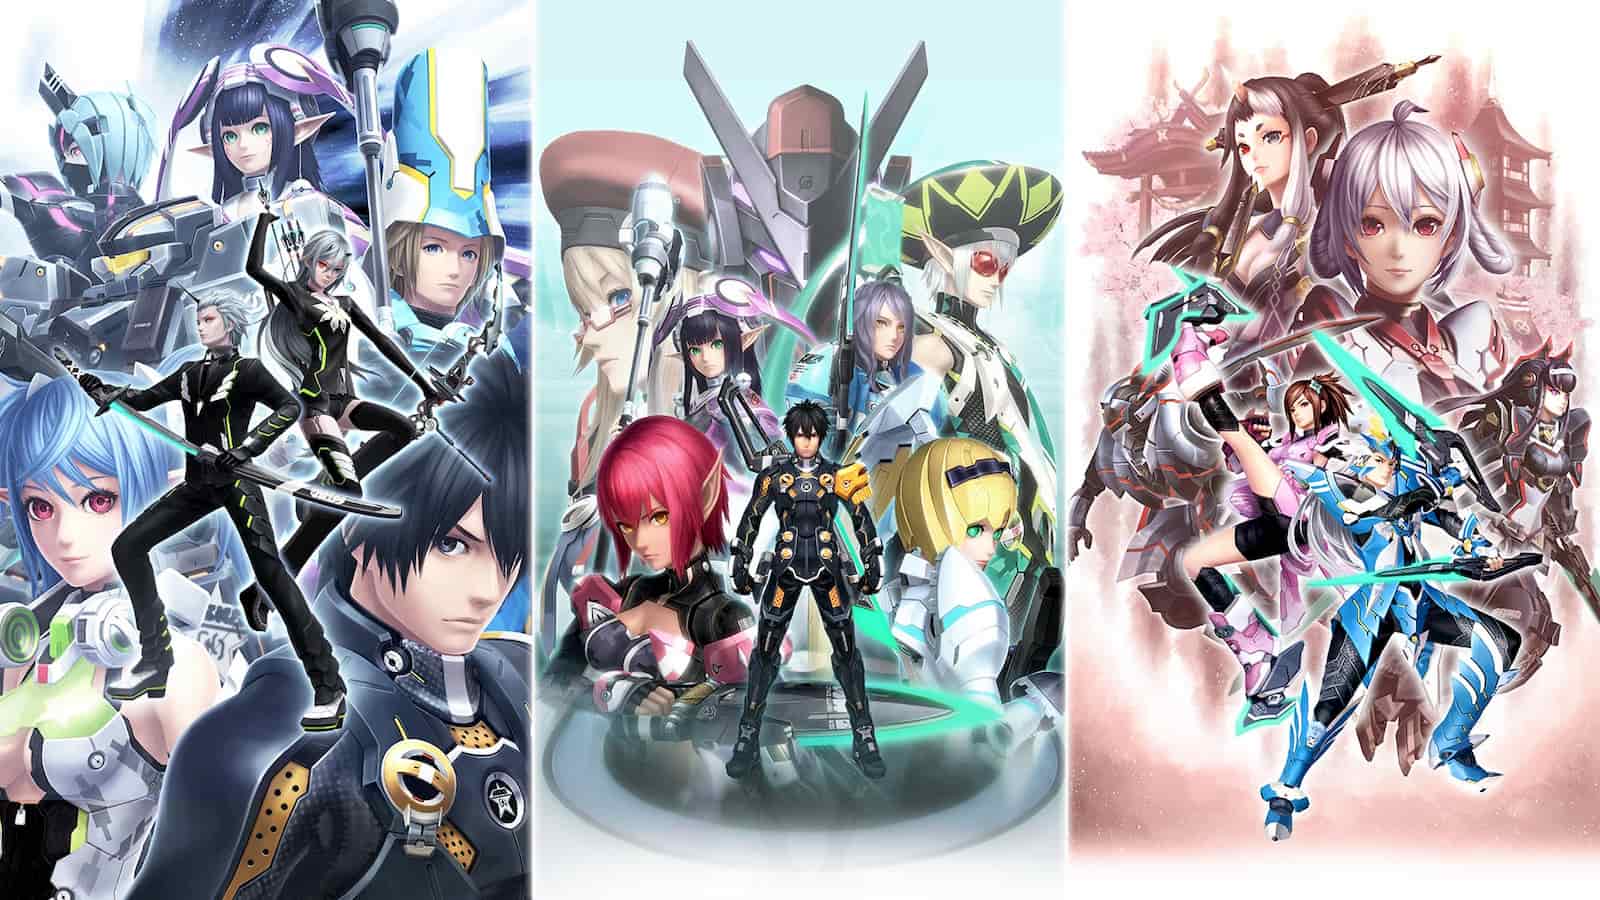 Microsoft botched the Phantasy Star Online 2 PC launch, thankfully modders fixed it